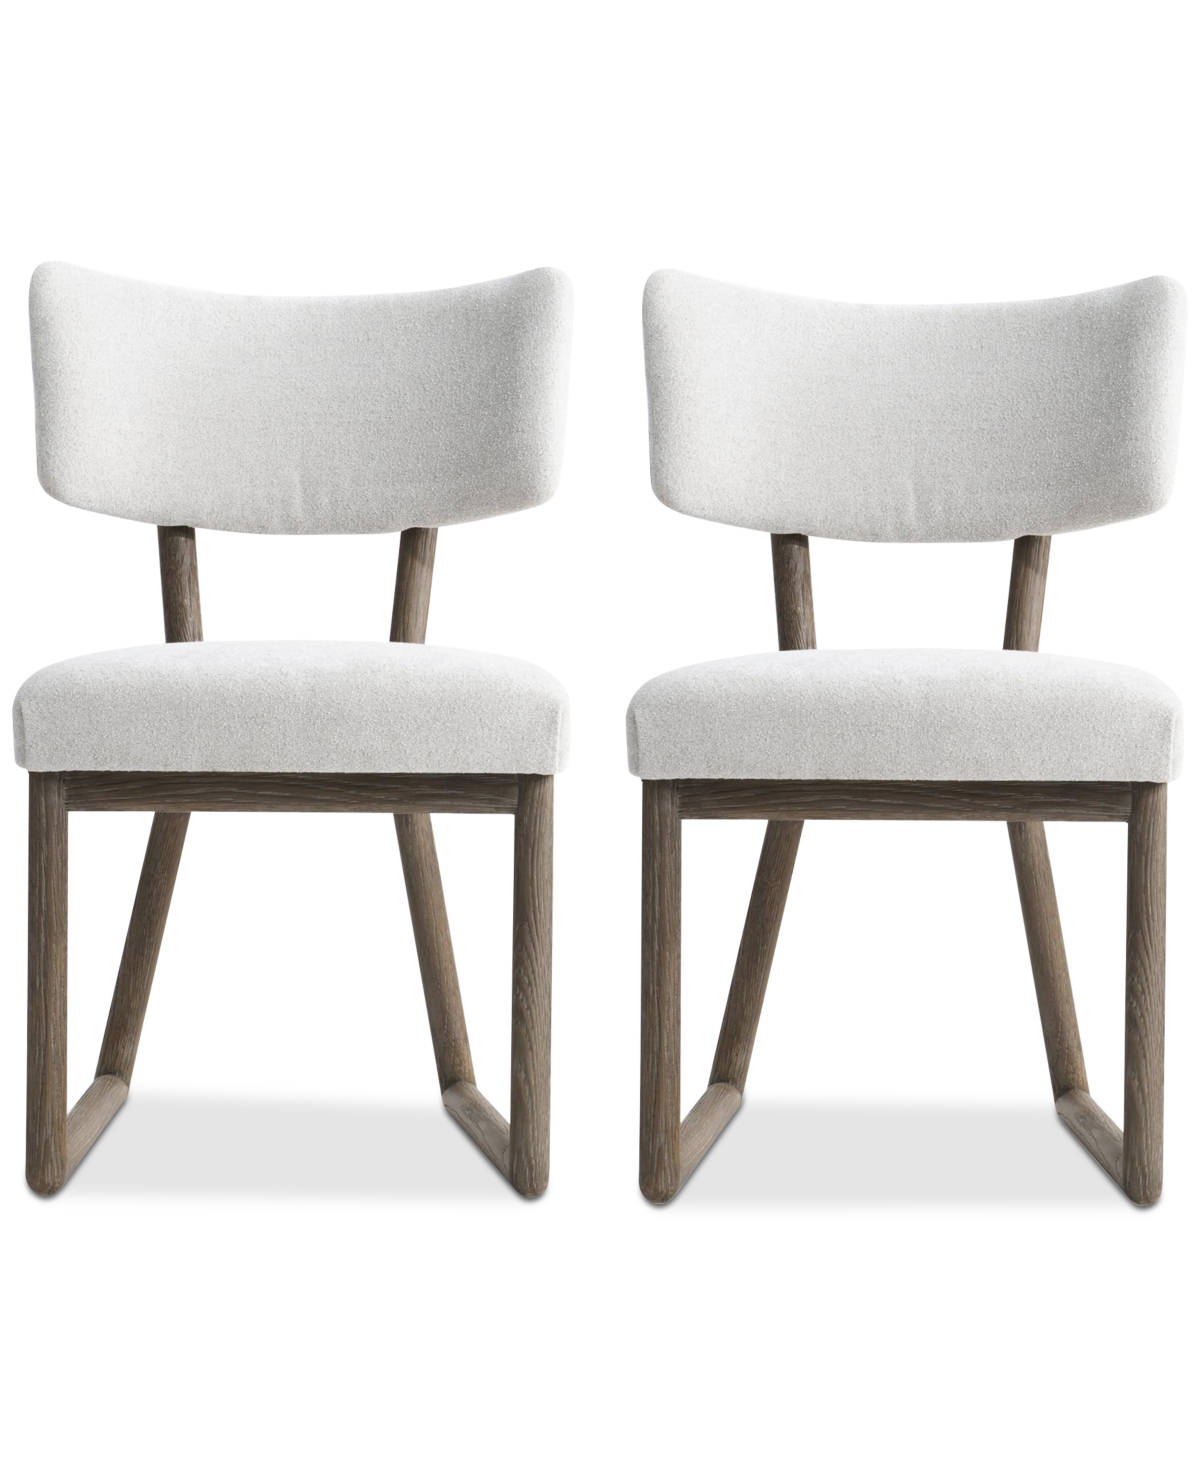 Bernhardt Foundations 2pc Side Chair Set In No Color